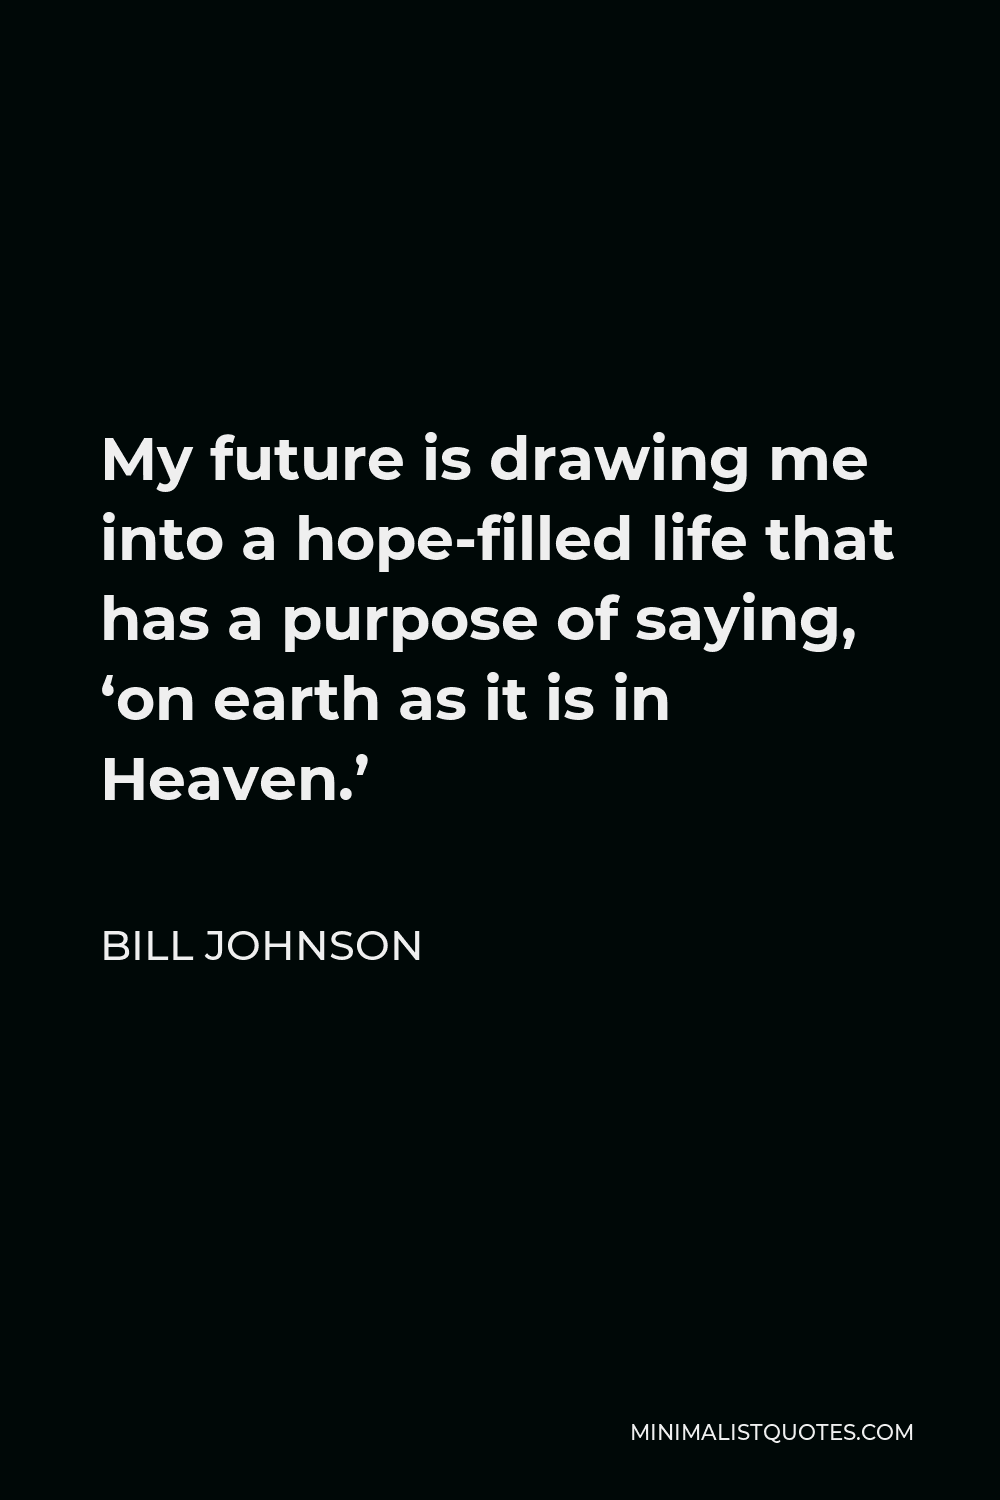 Bill Johnson Quote - My future is drawing me into a hope-filled life that has a purpose of saying, ‘on earth as it is in Heaven.’